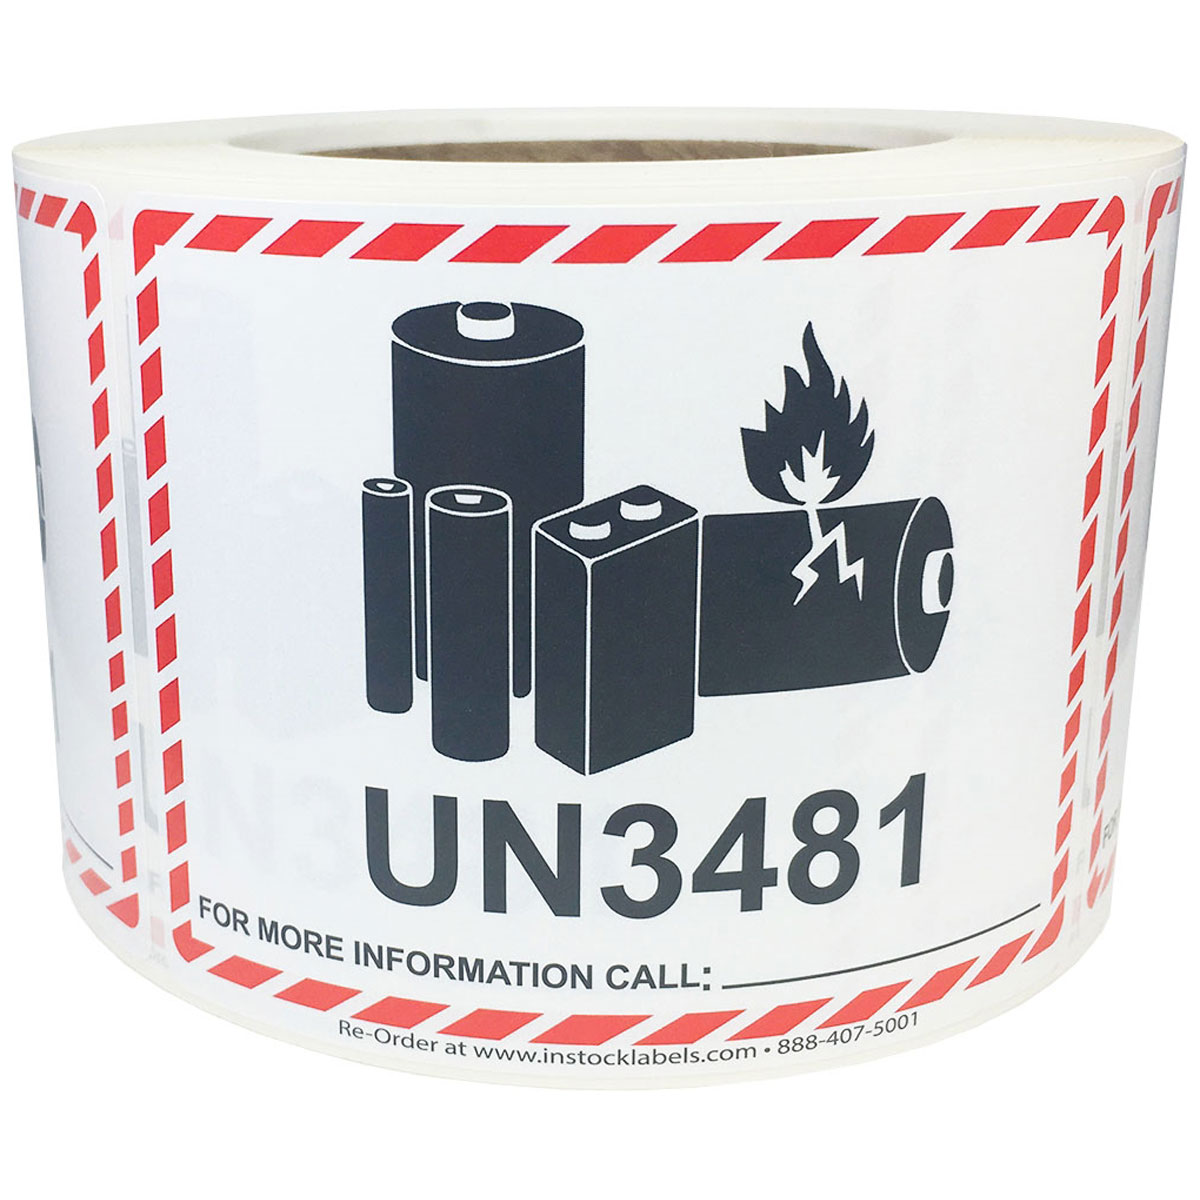 Hazard Class 9 UN3481 Shipping Stickers 4 x 4.75 Inches Wide 500 Total Labels 